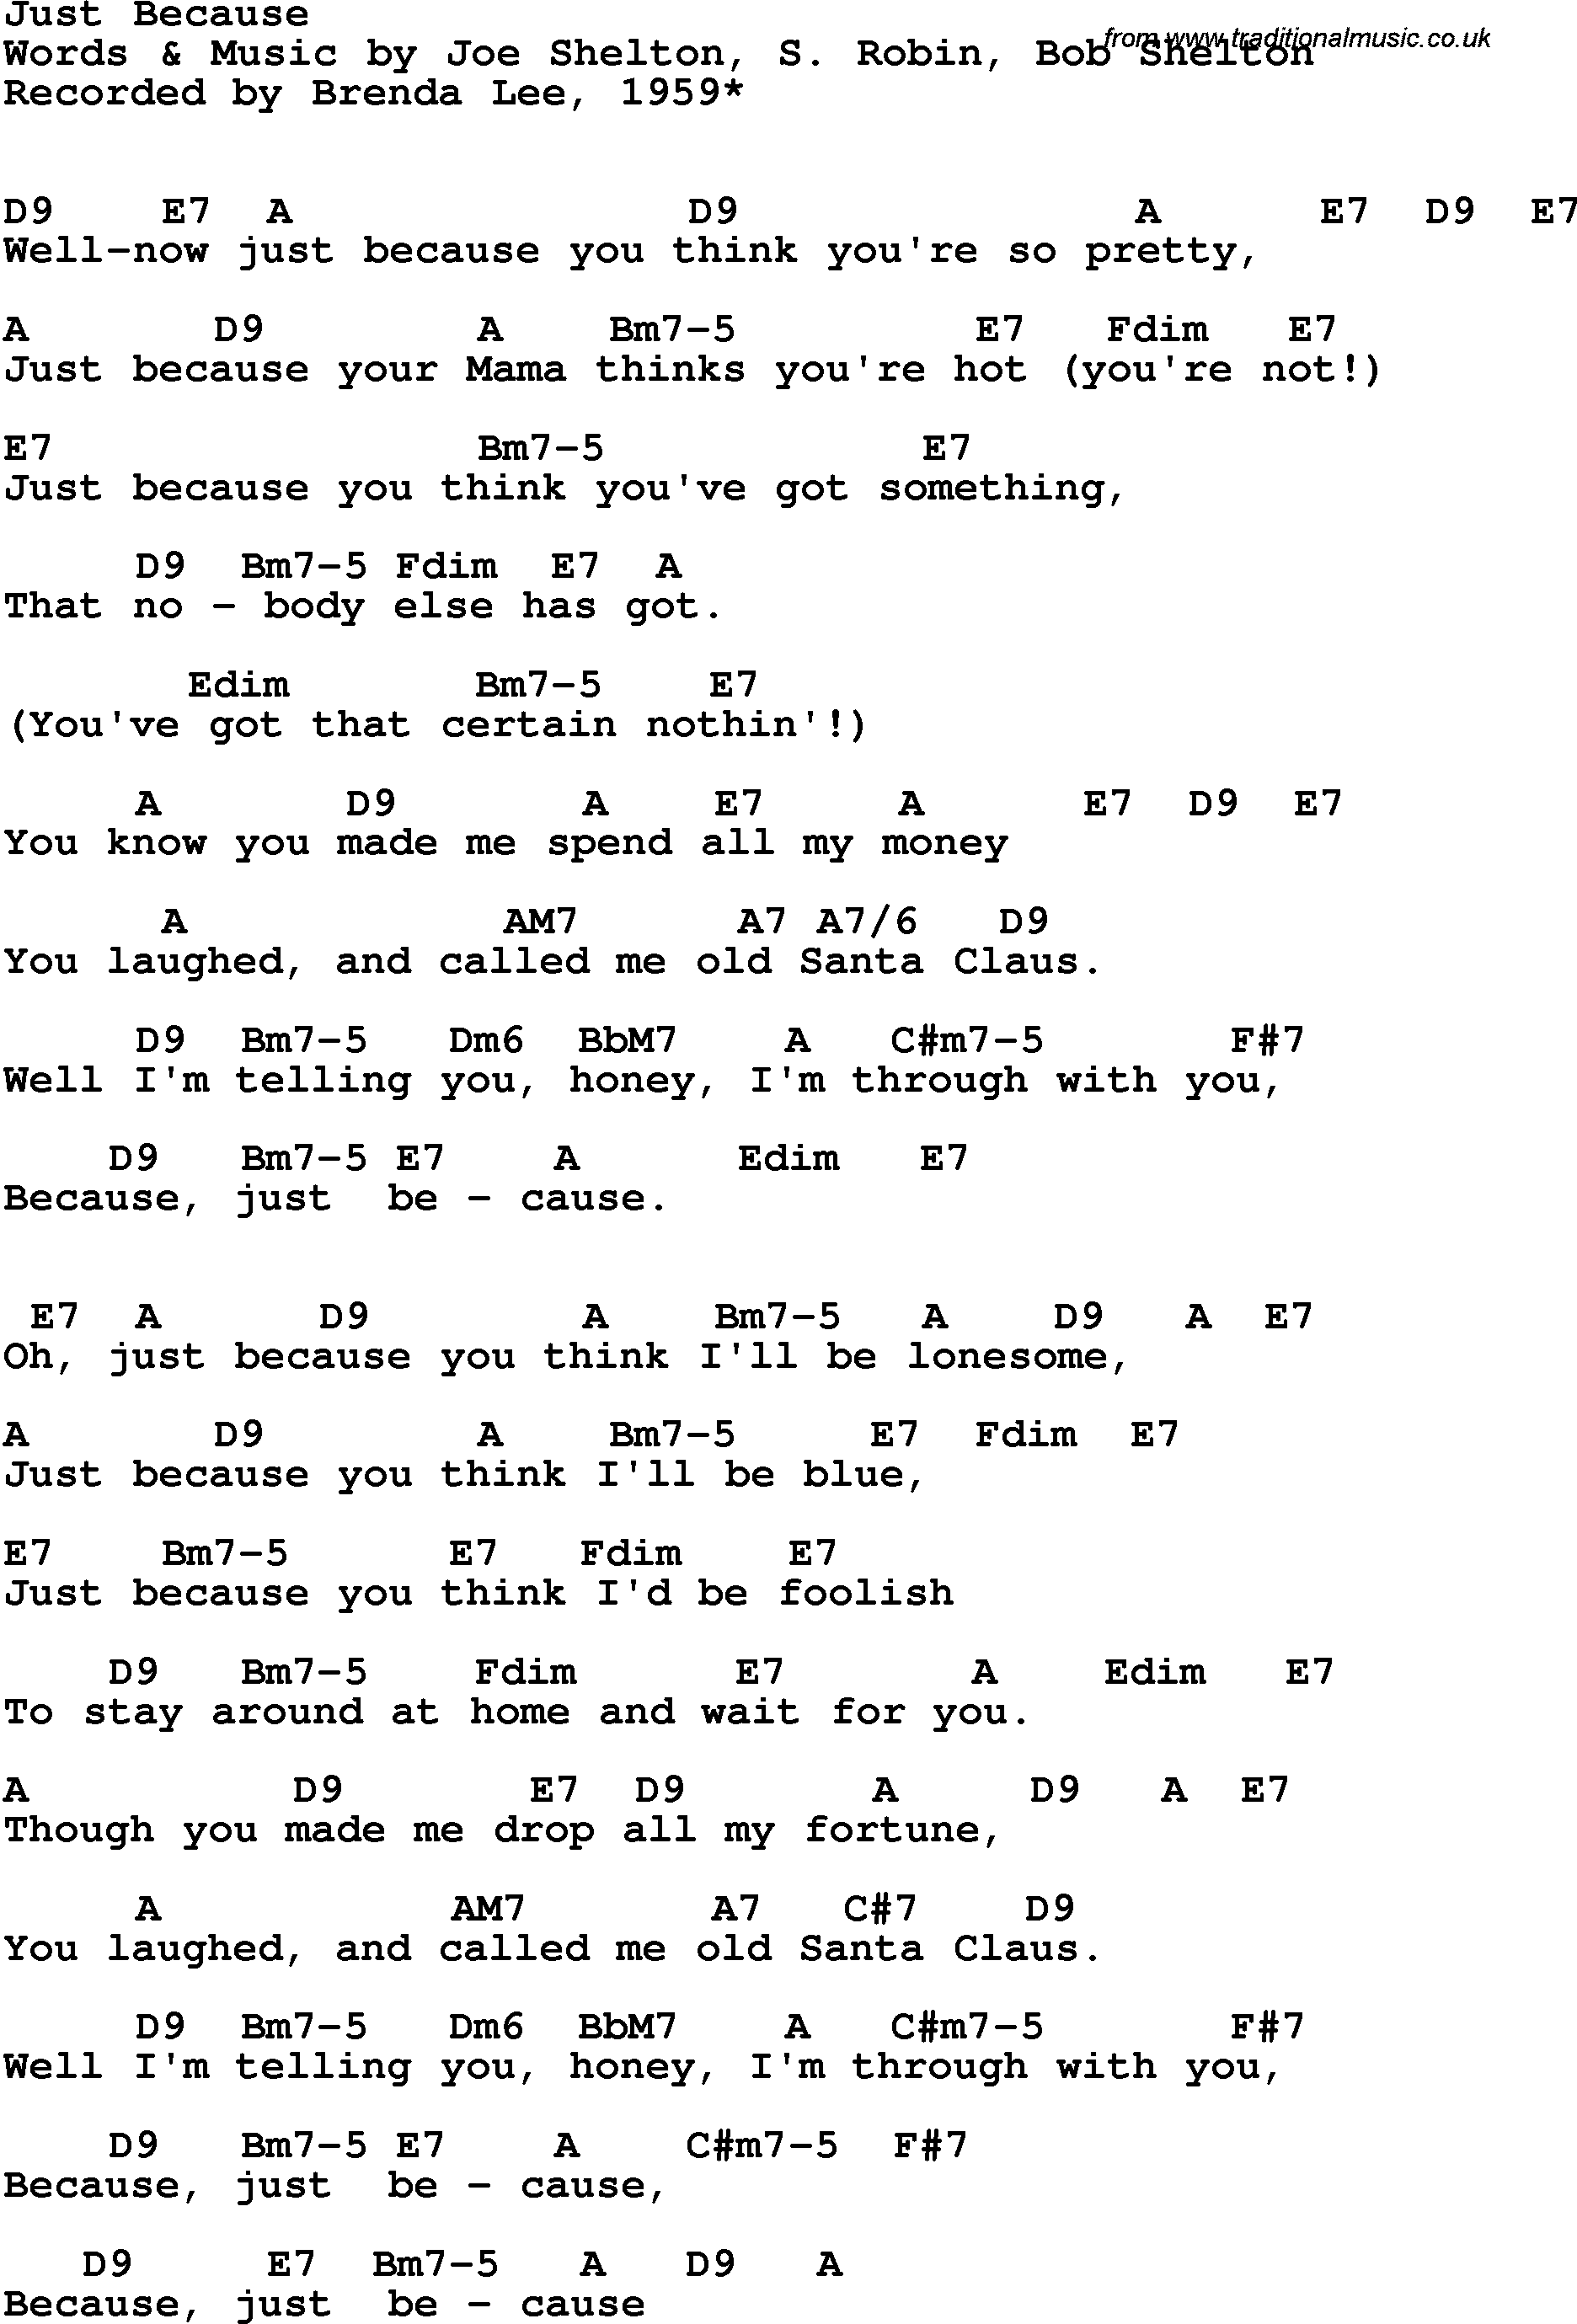 Song Lyrics with guitar chords for Just Because - Brenda Lee, 1959